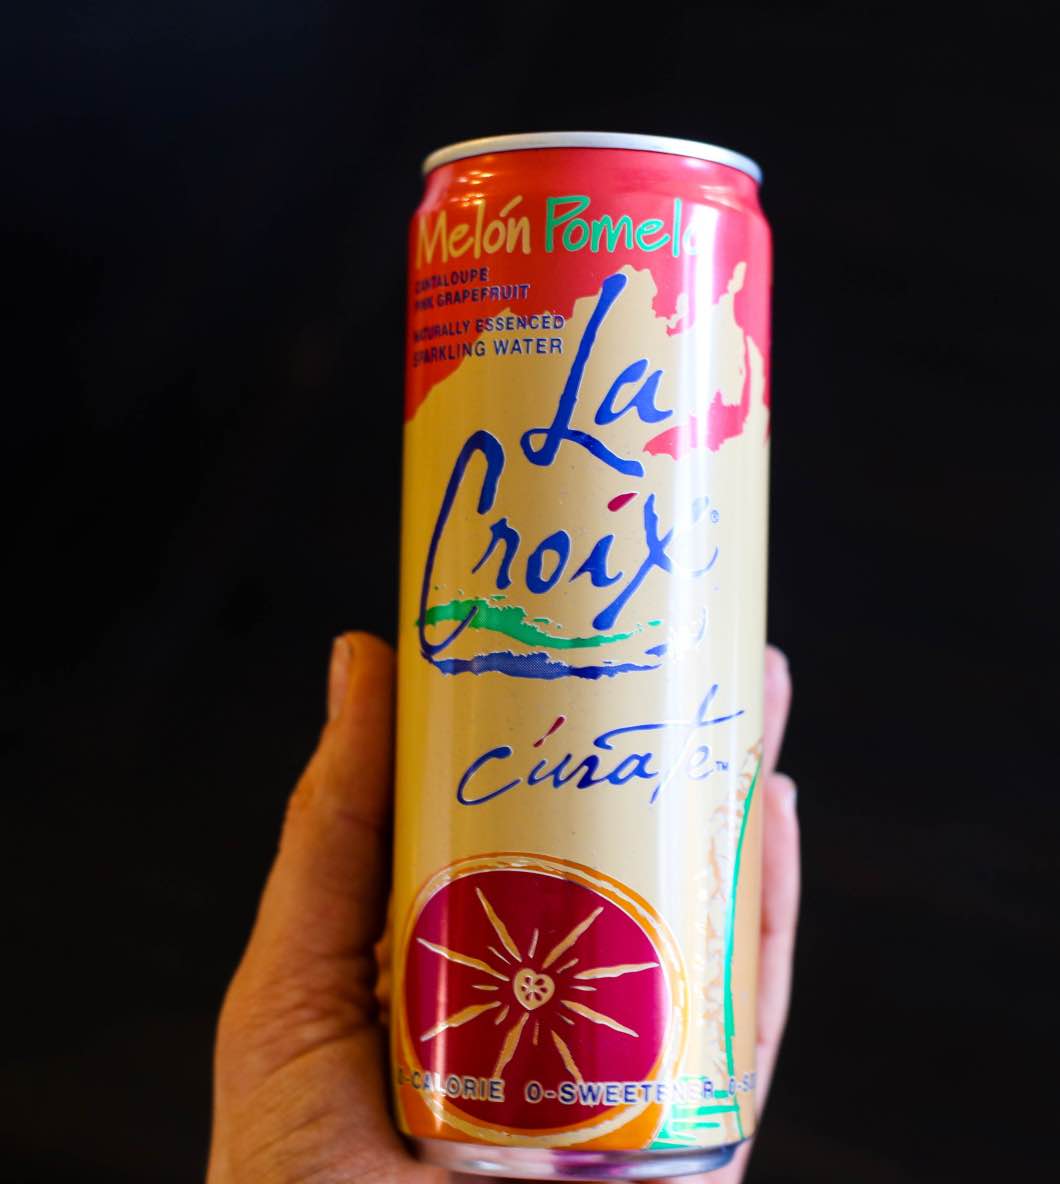 lacroixcitrus - Hosting the Holidays with Babbleboxx by Atlanta style blogger Happily Hughes